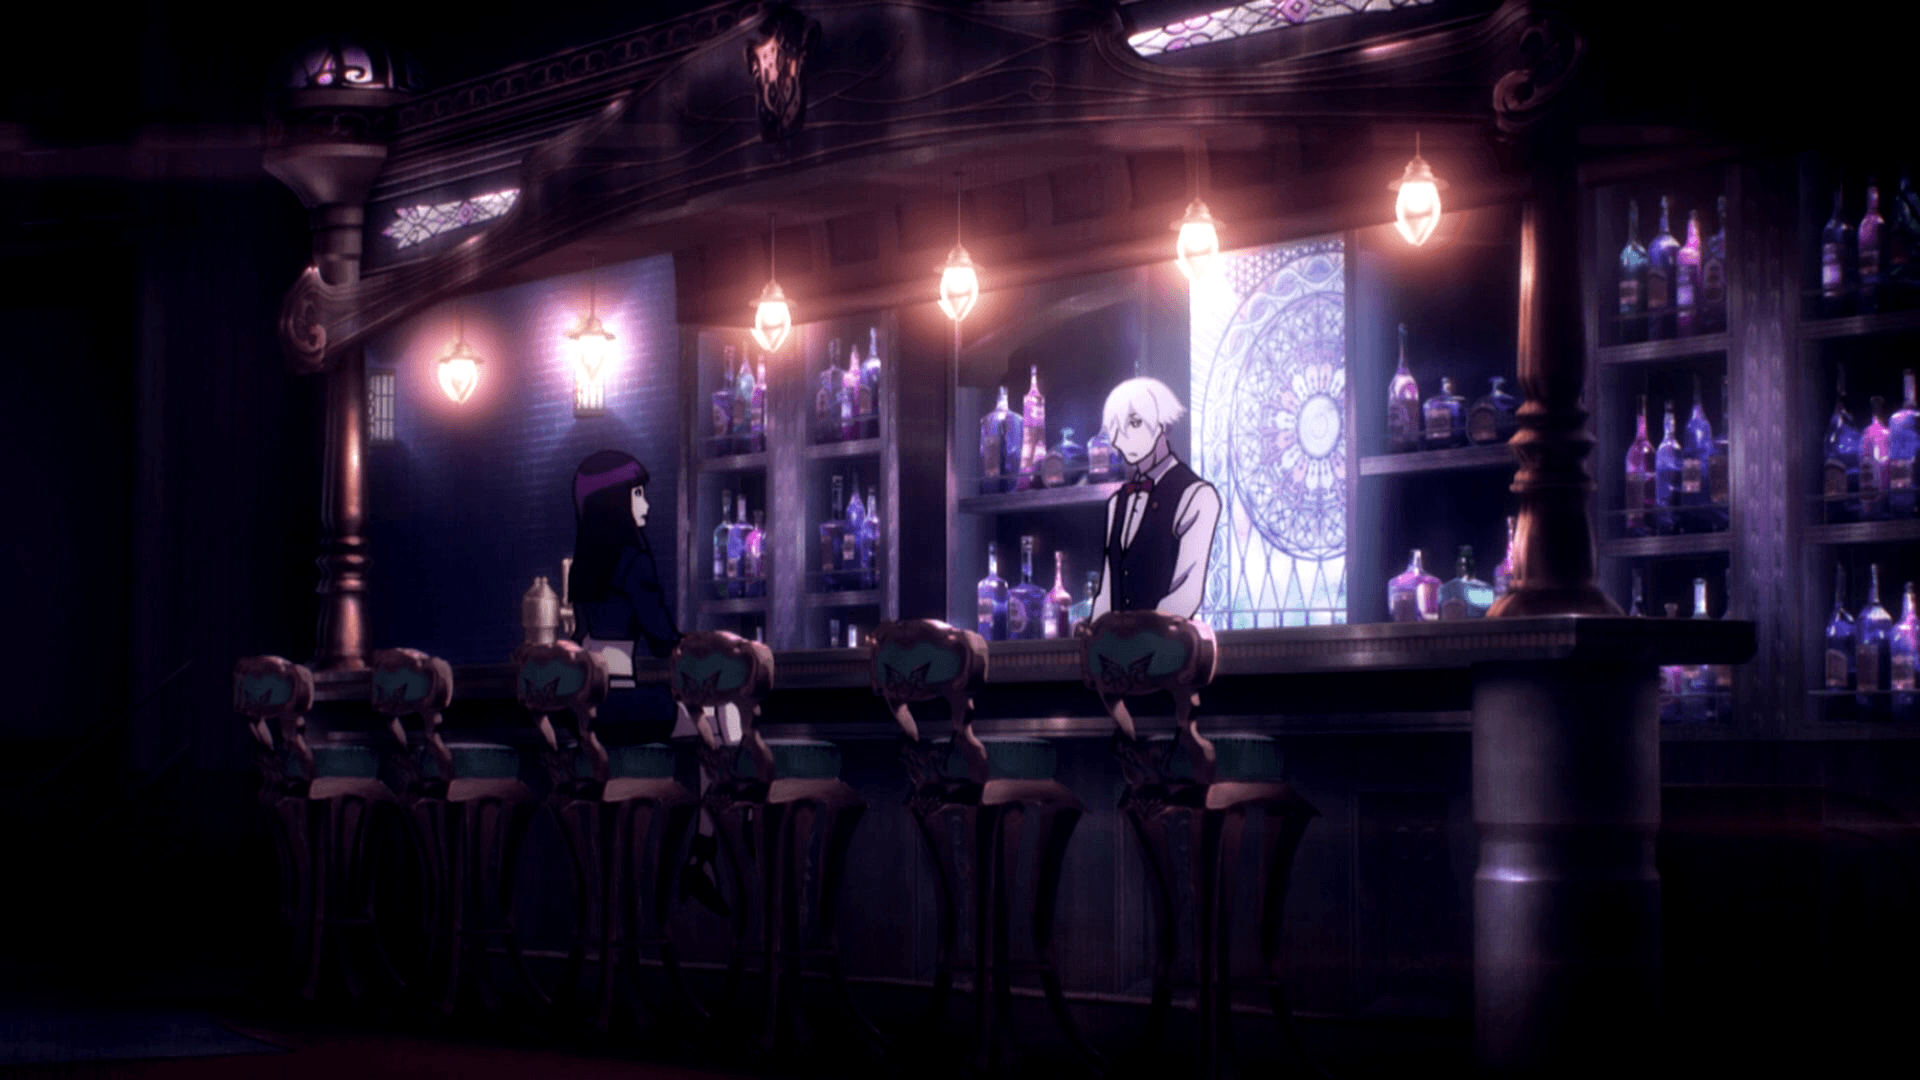 50+ Death Parade HD Wallpapers and Backgrounds